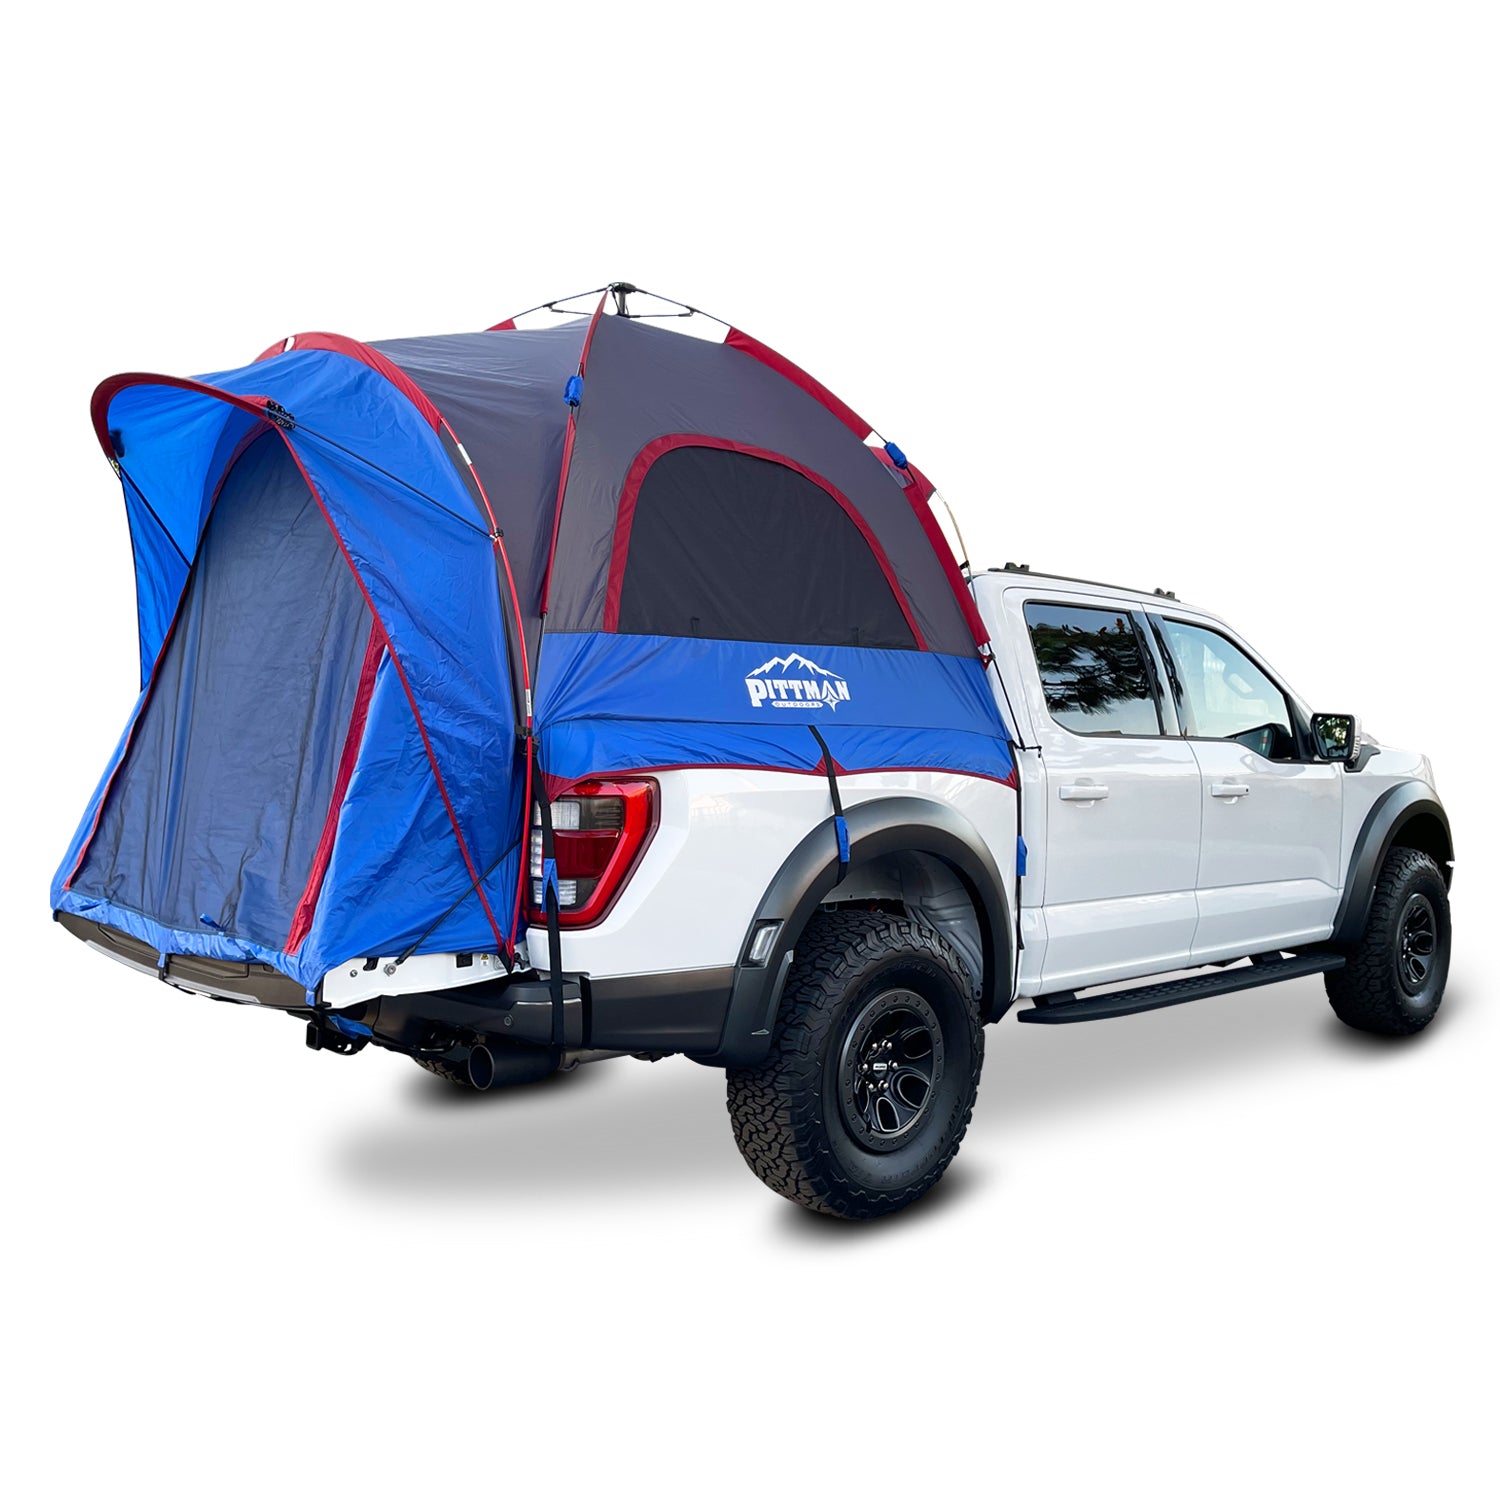 Pittman Outdoors PPI-TBT_F5 Pittman Outdoors EZ_UP Truck Bed Tent  PPI-TBT_F5, Full Size 5.5 ft.  - 5.8 ft.  Beds